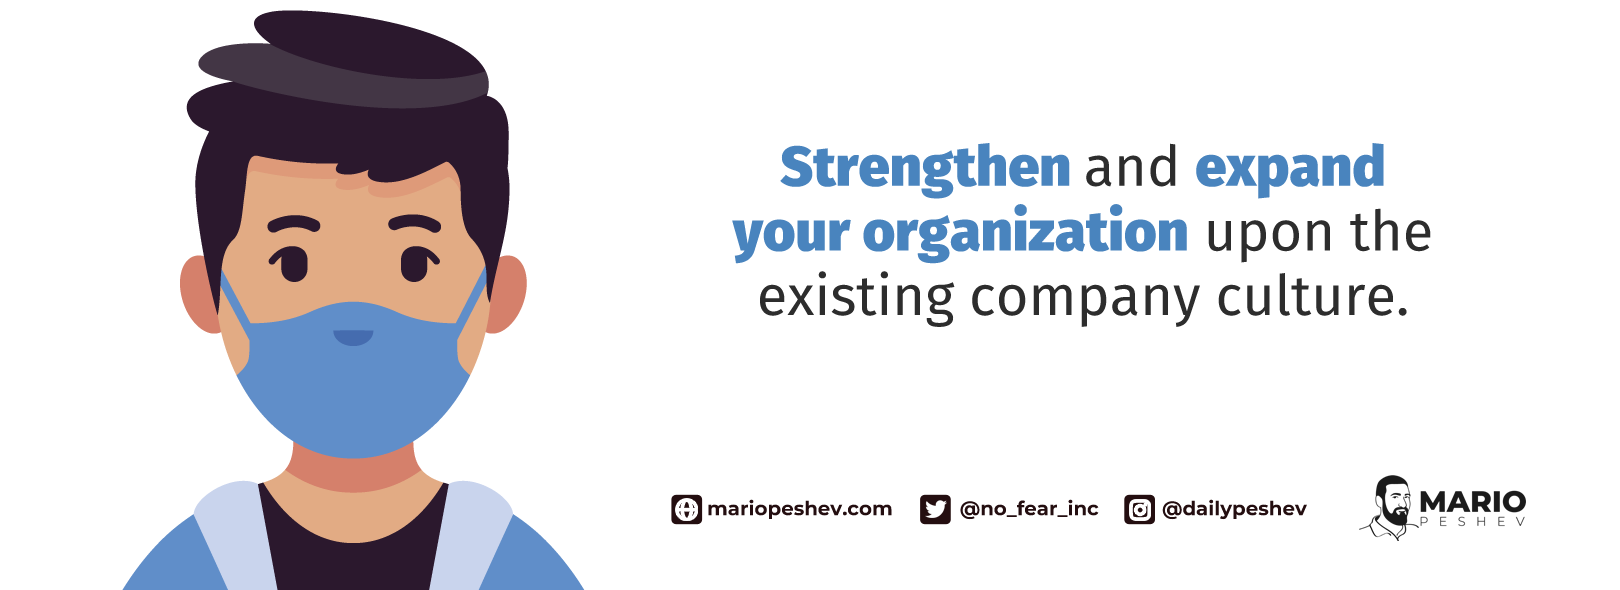 expand your organization